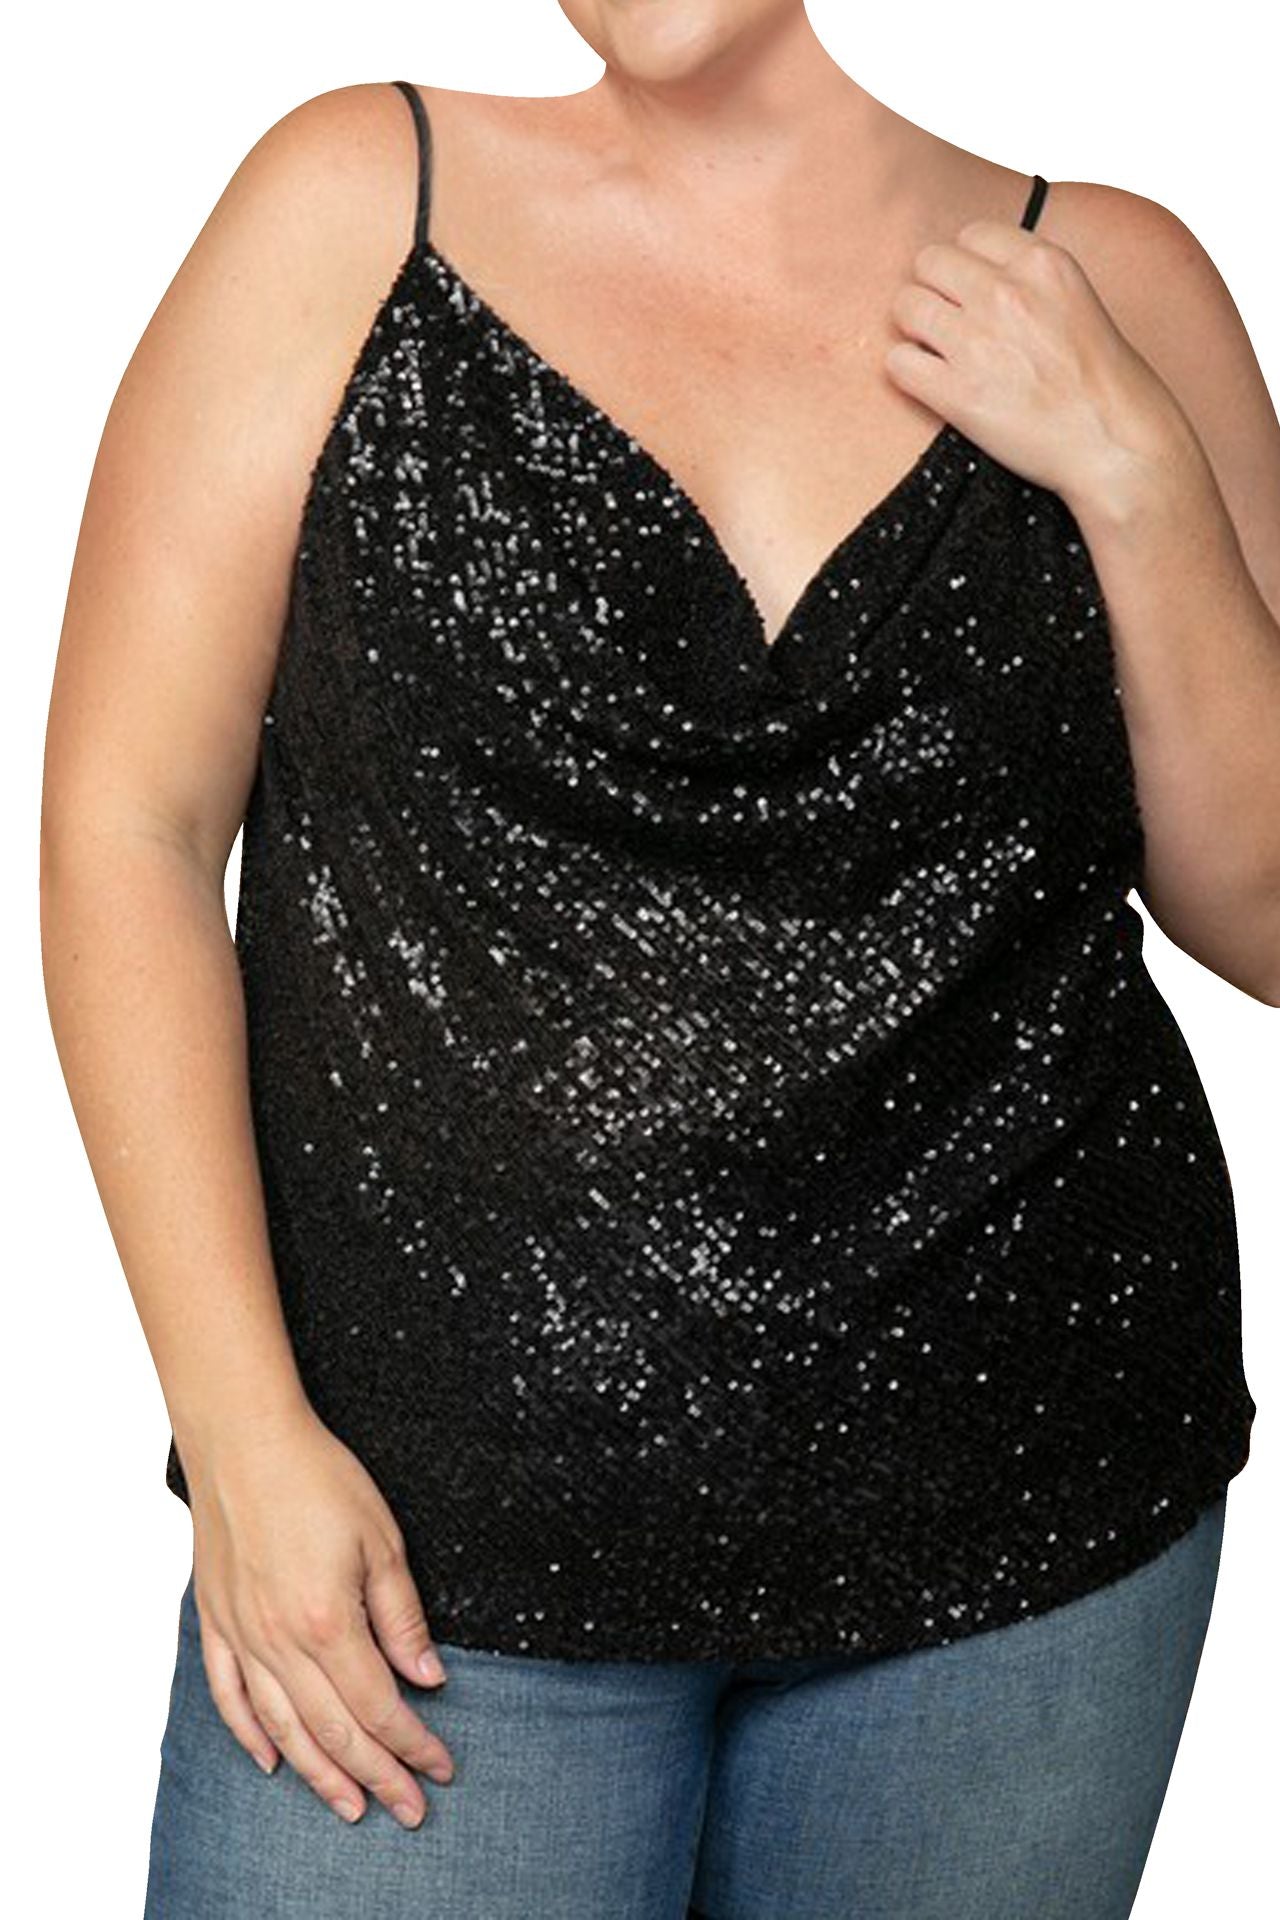 "sexy sequin top" "plus size evening tops sequin" "Kyle X Shahida" "embellished top plus size" "cute sequin tops"